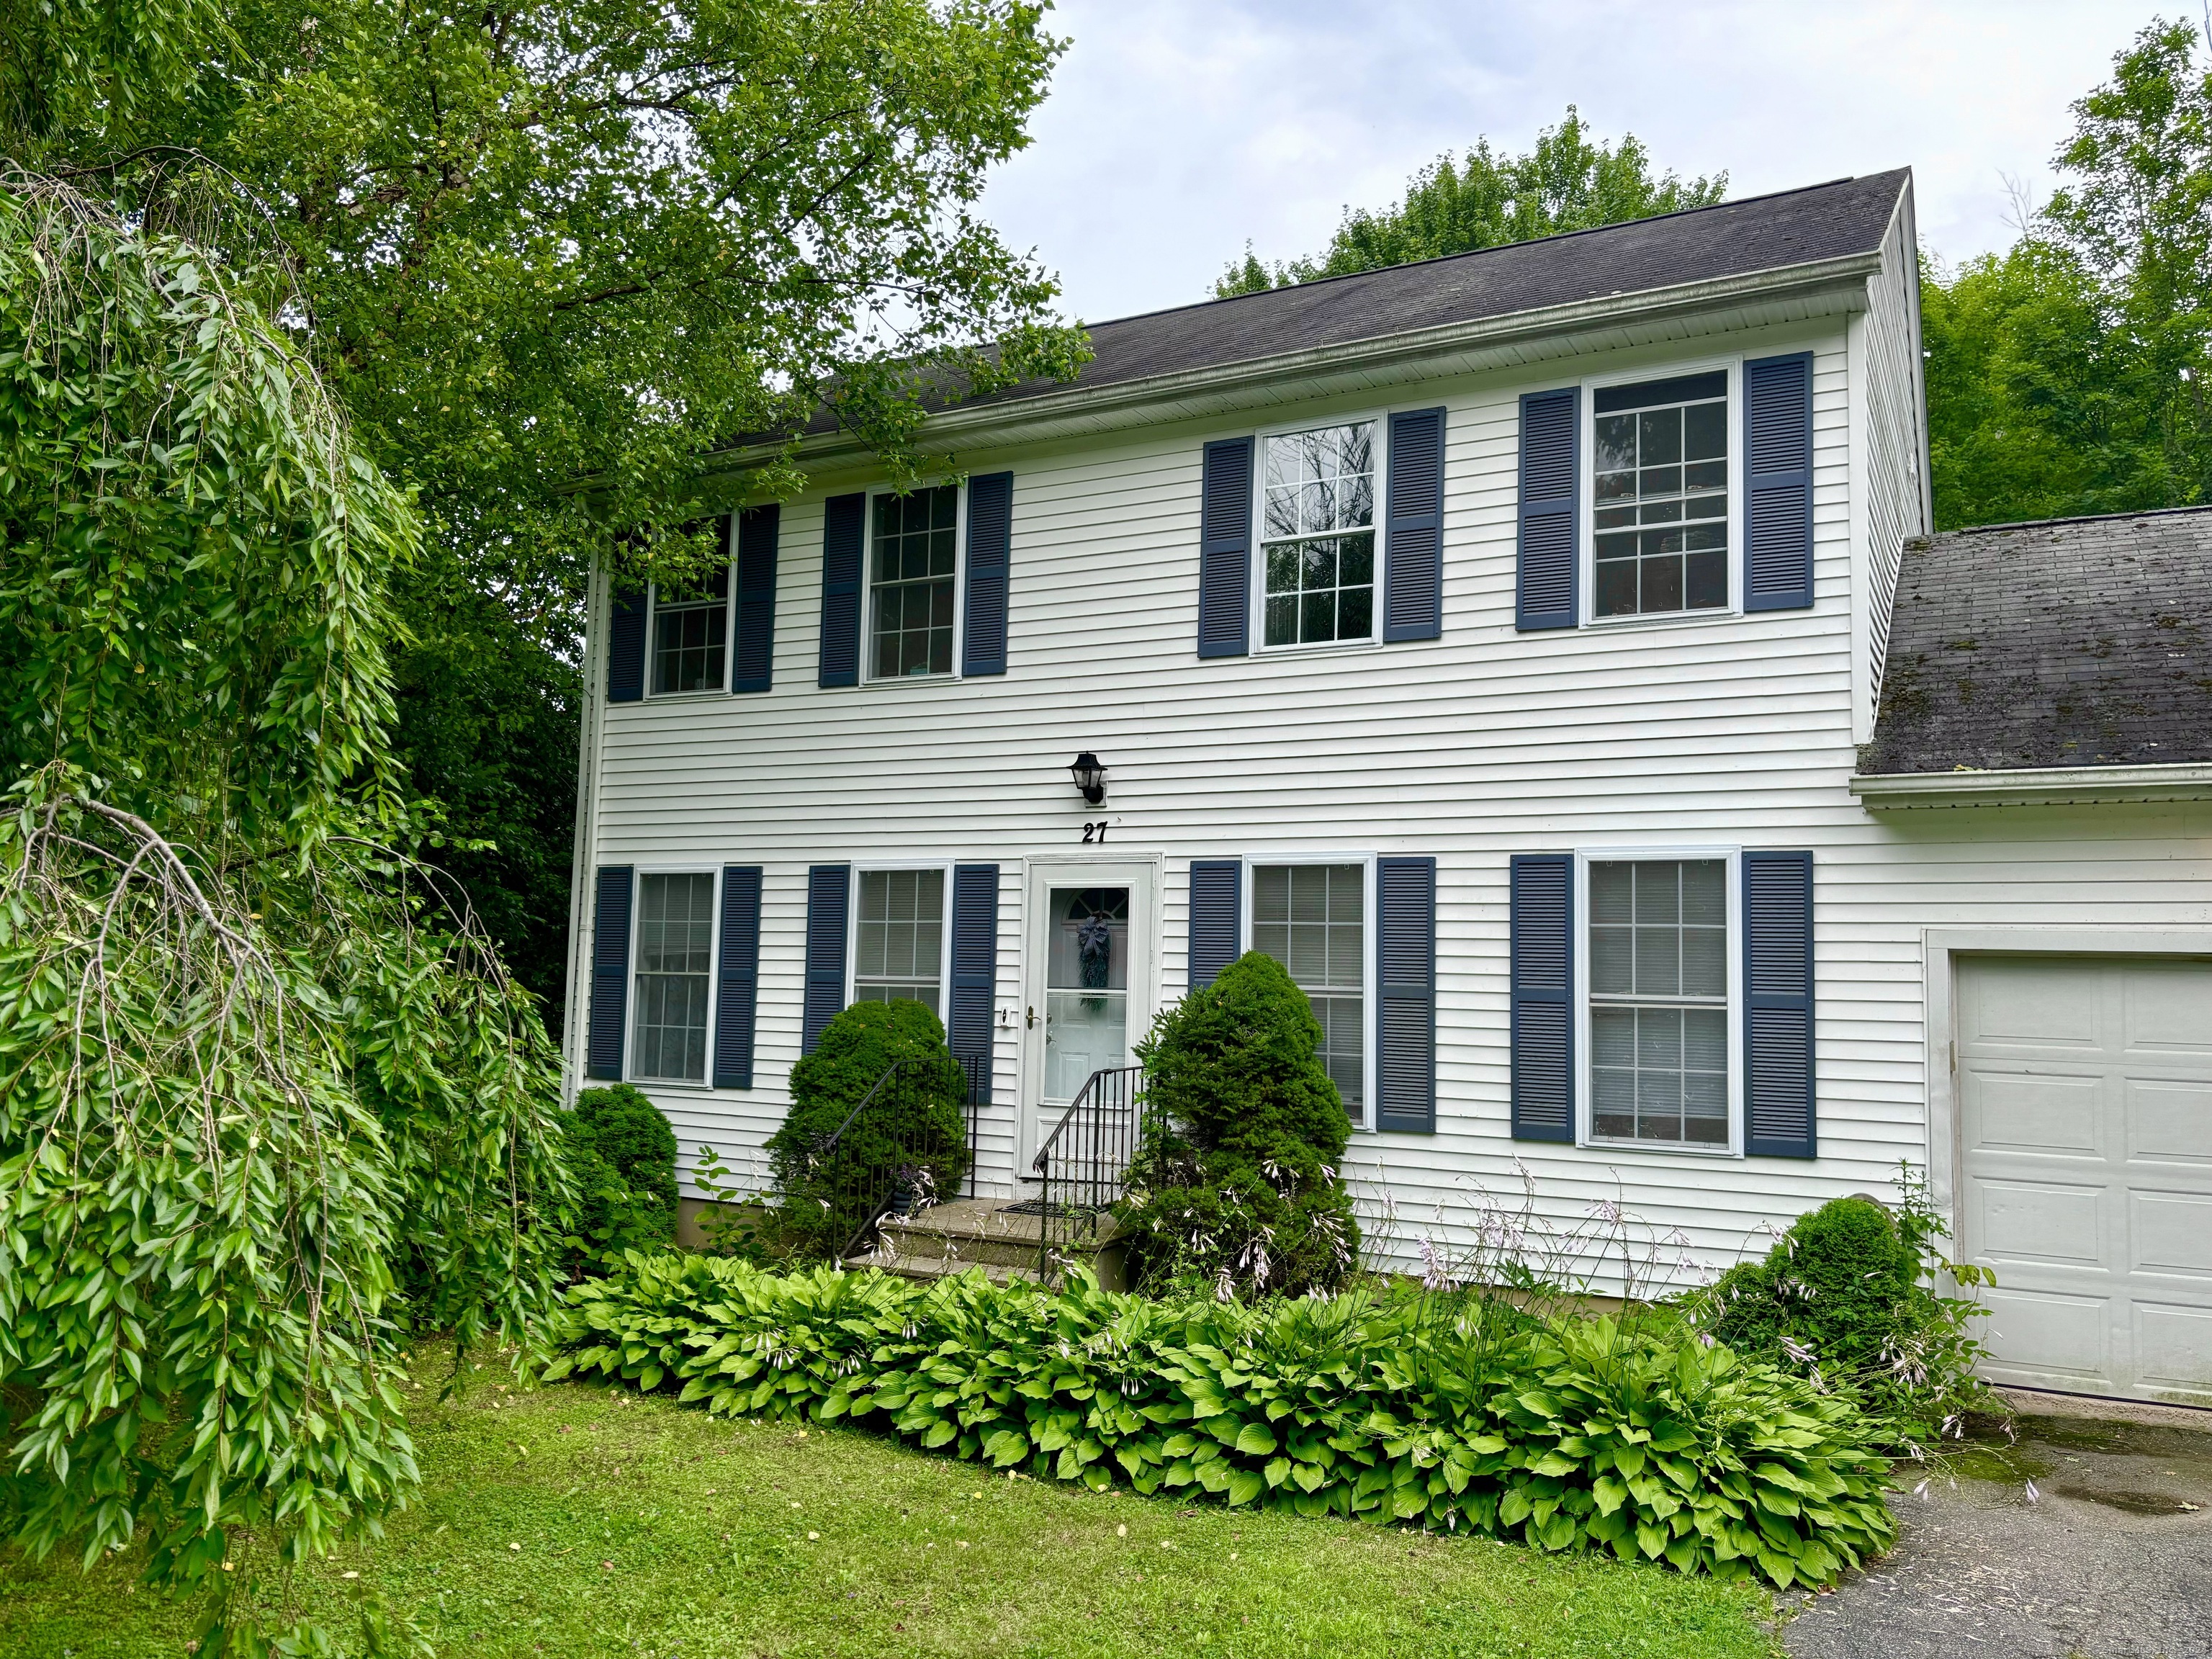 Property for Sale at 27 Thomas Street, Torrington, Connecticut - Bedrooms: 3 
Bathrooms: 2 
Rooms: 6  - $264,900